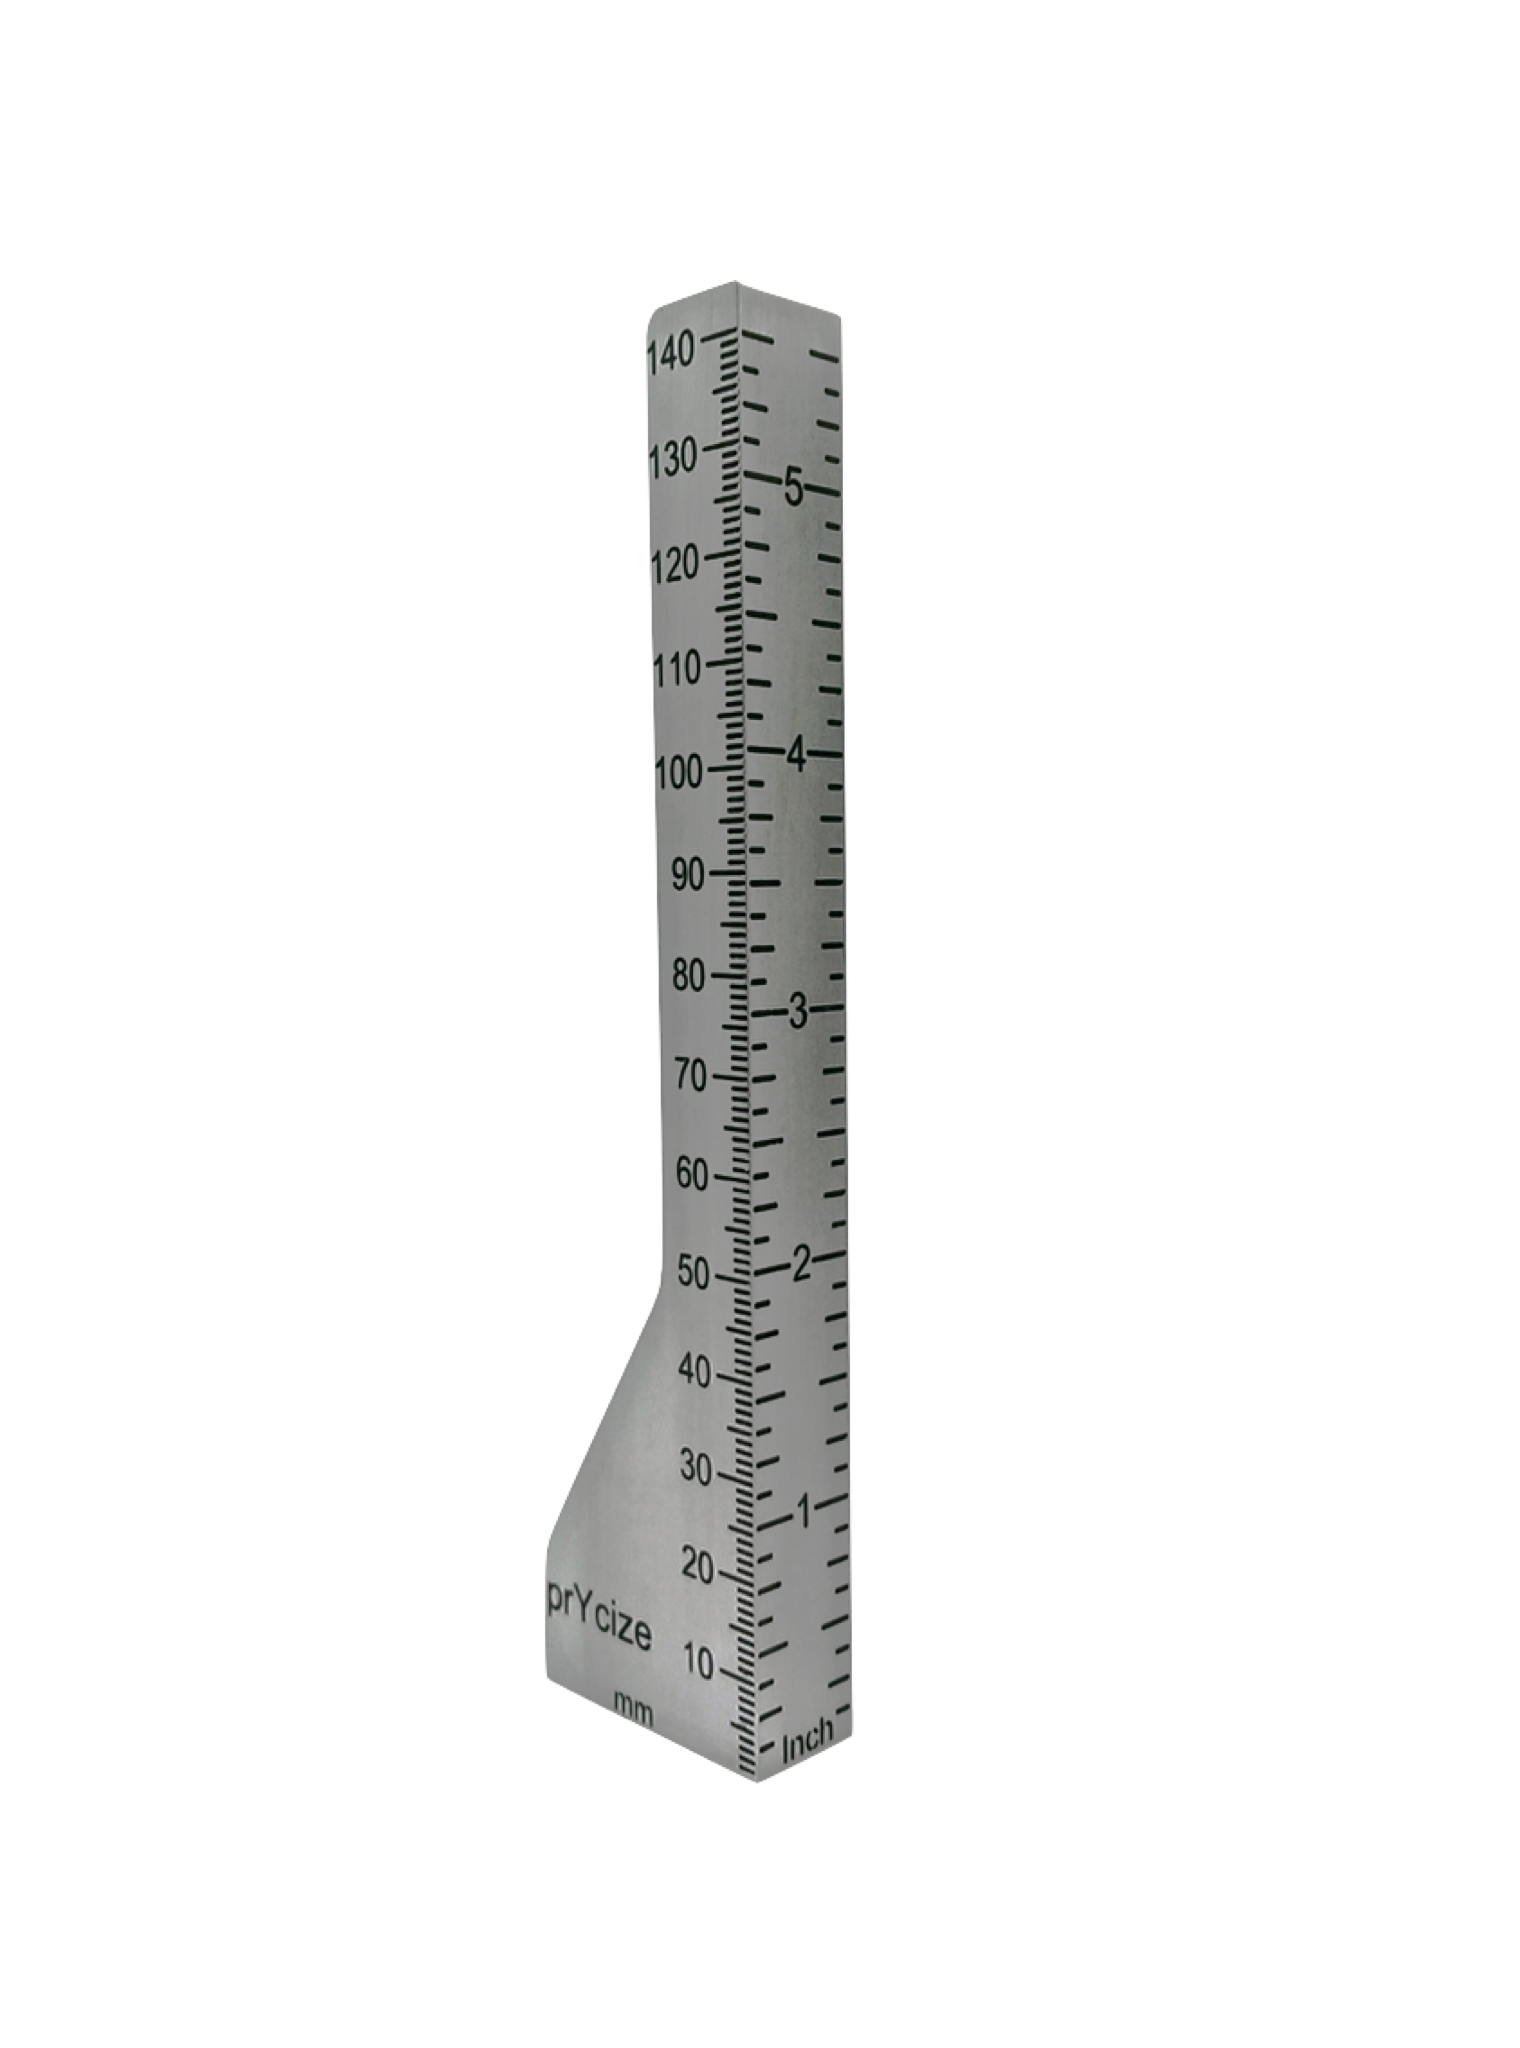 Prycize Midi photographer's vertical height gauge showing metric and imperial measuring faces and scale rules for measurements in photography of miniatures, dolls, figures, toys and other small objects